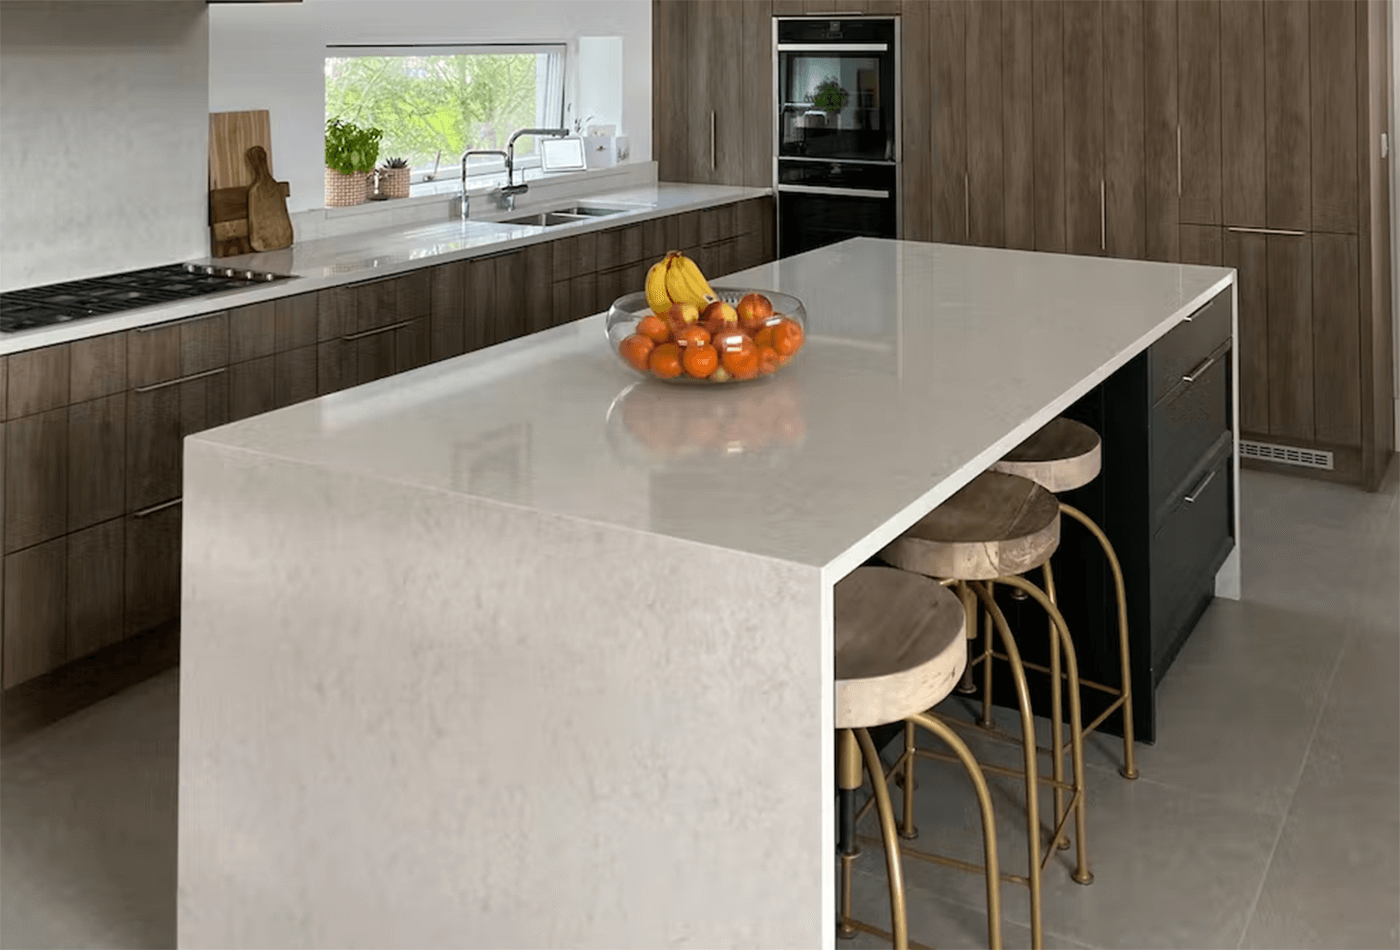 What can Silestone Snowy Ibiza Offer